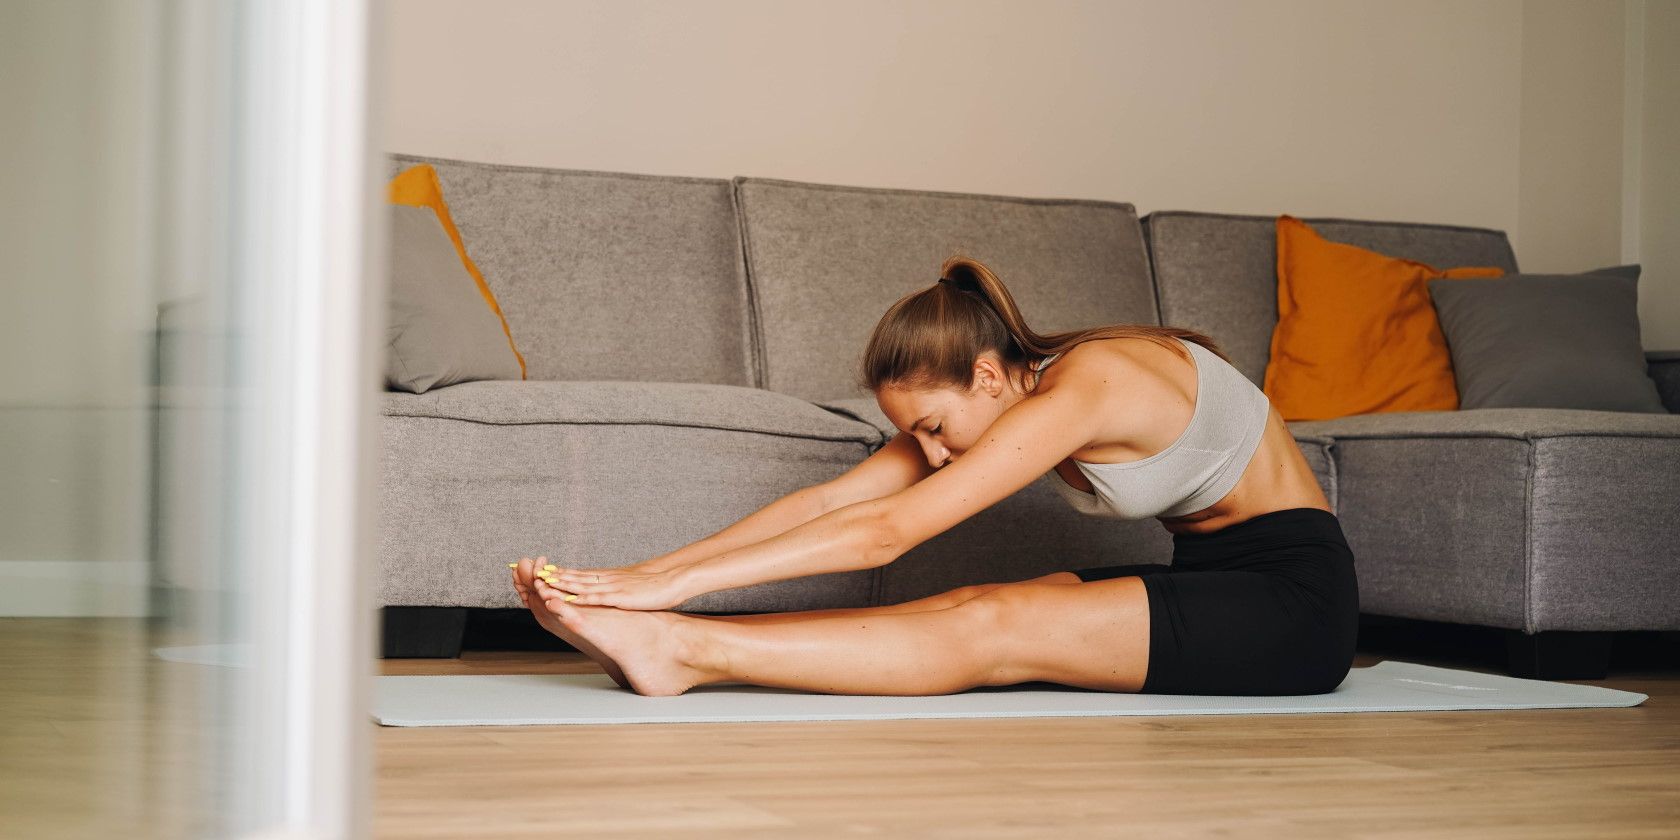 The 4 Best Stretching Apps to Improve Your Flexibility